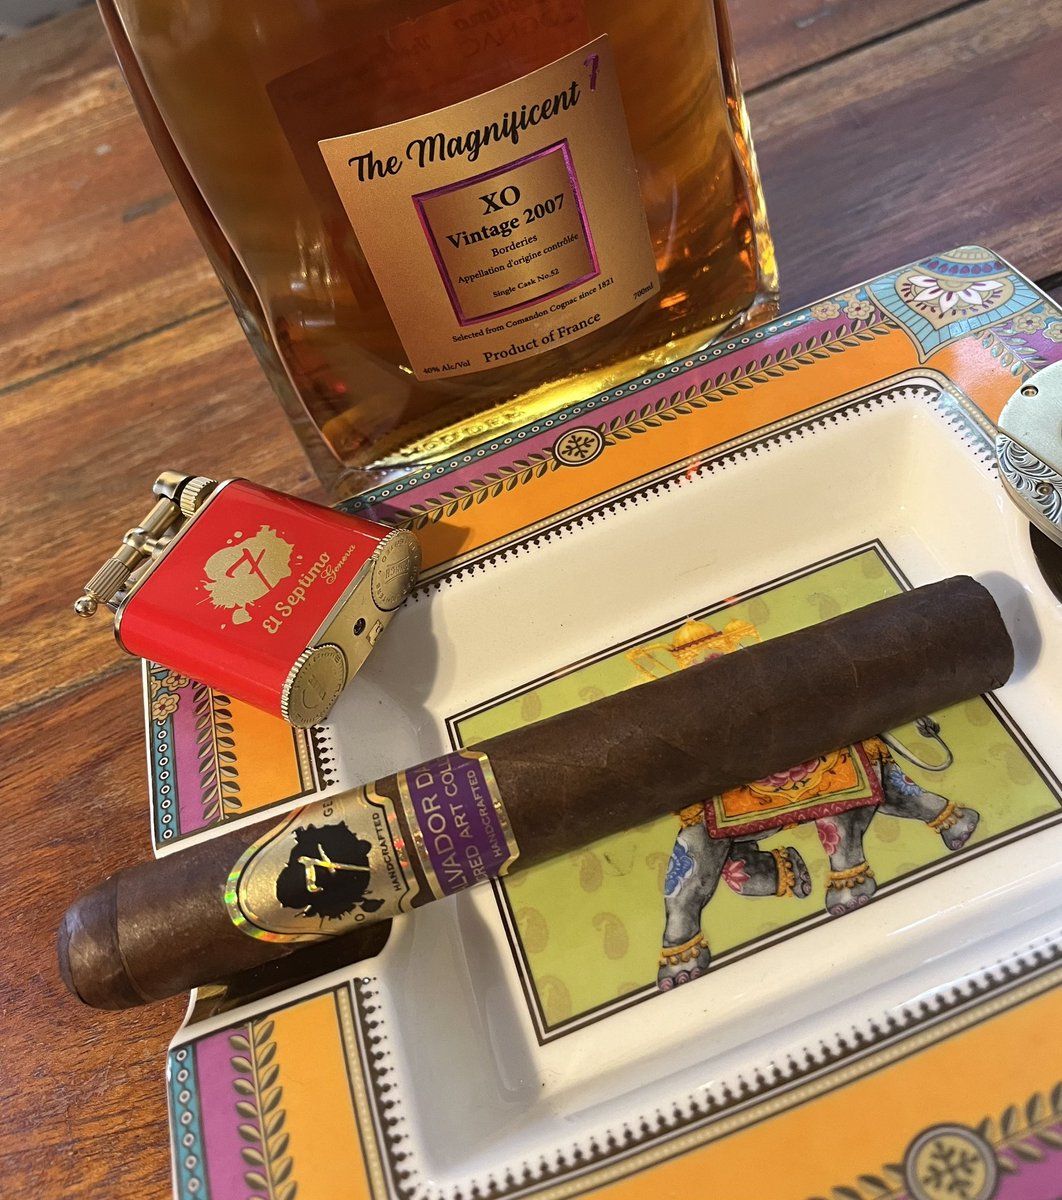 Sunday evening relaxation time with El Septimo Salvador Dali and El Septimo 2007 Cognac.Both these products are amazing and complement each other so well. #elseptimoceo #elseptimocigars #elseptimocognac #elseptimo #cigar #cognac #2007
#sacredarts #salvadordali #bestofthebest